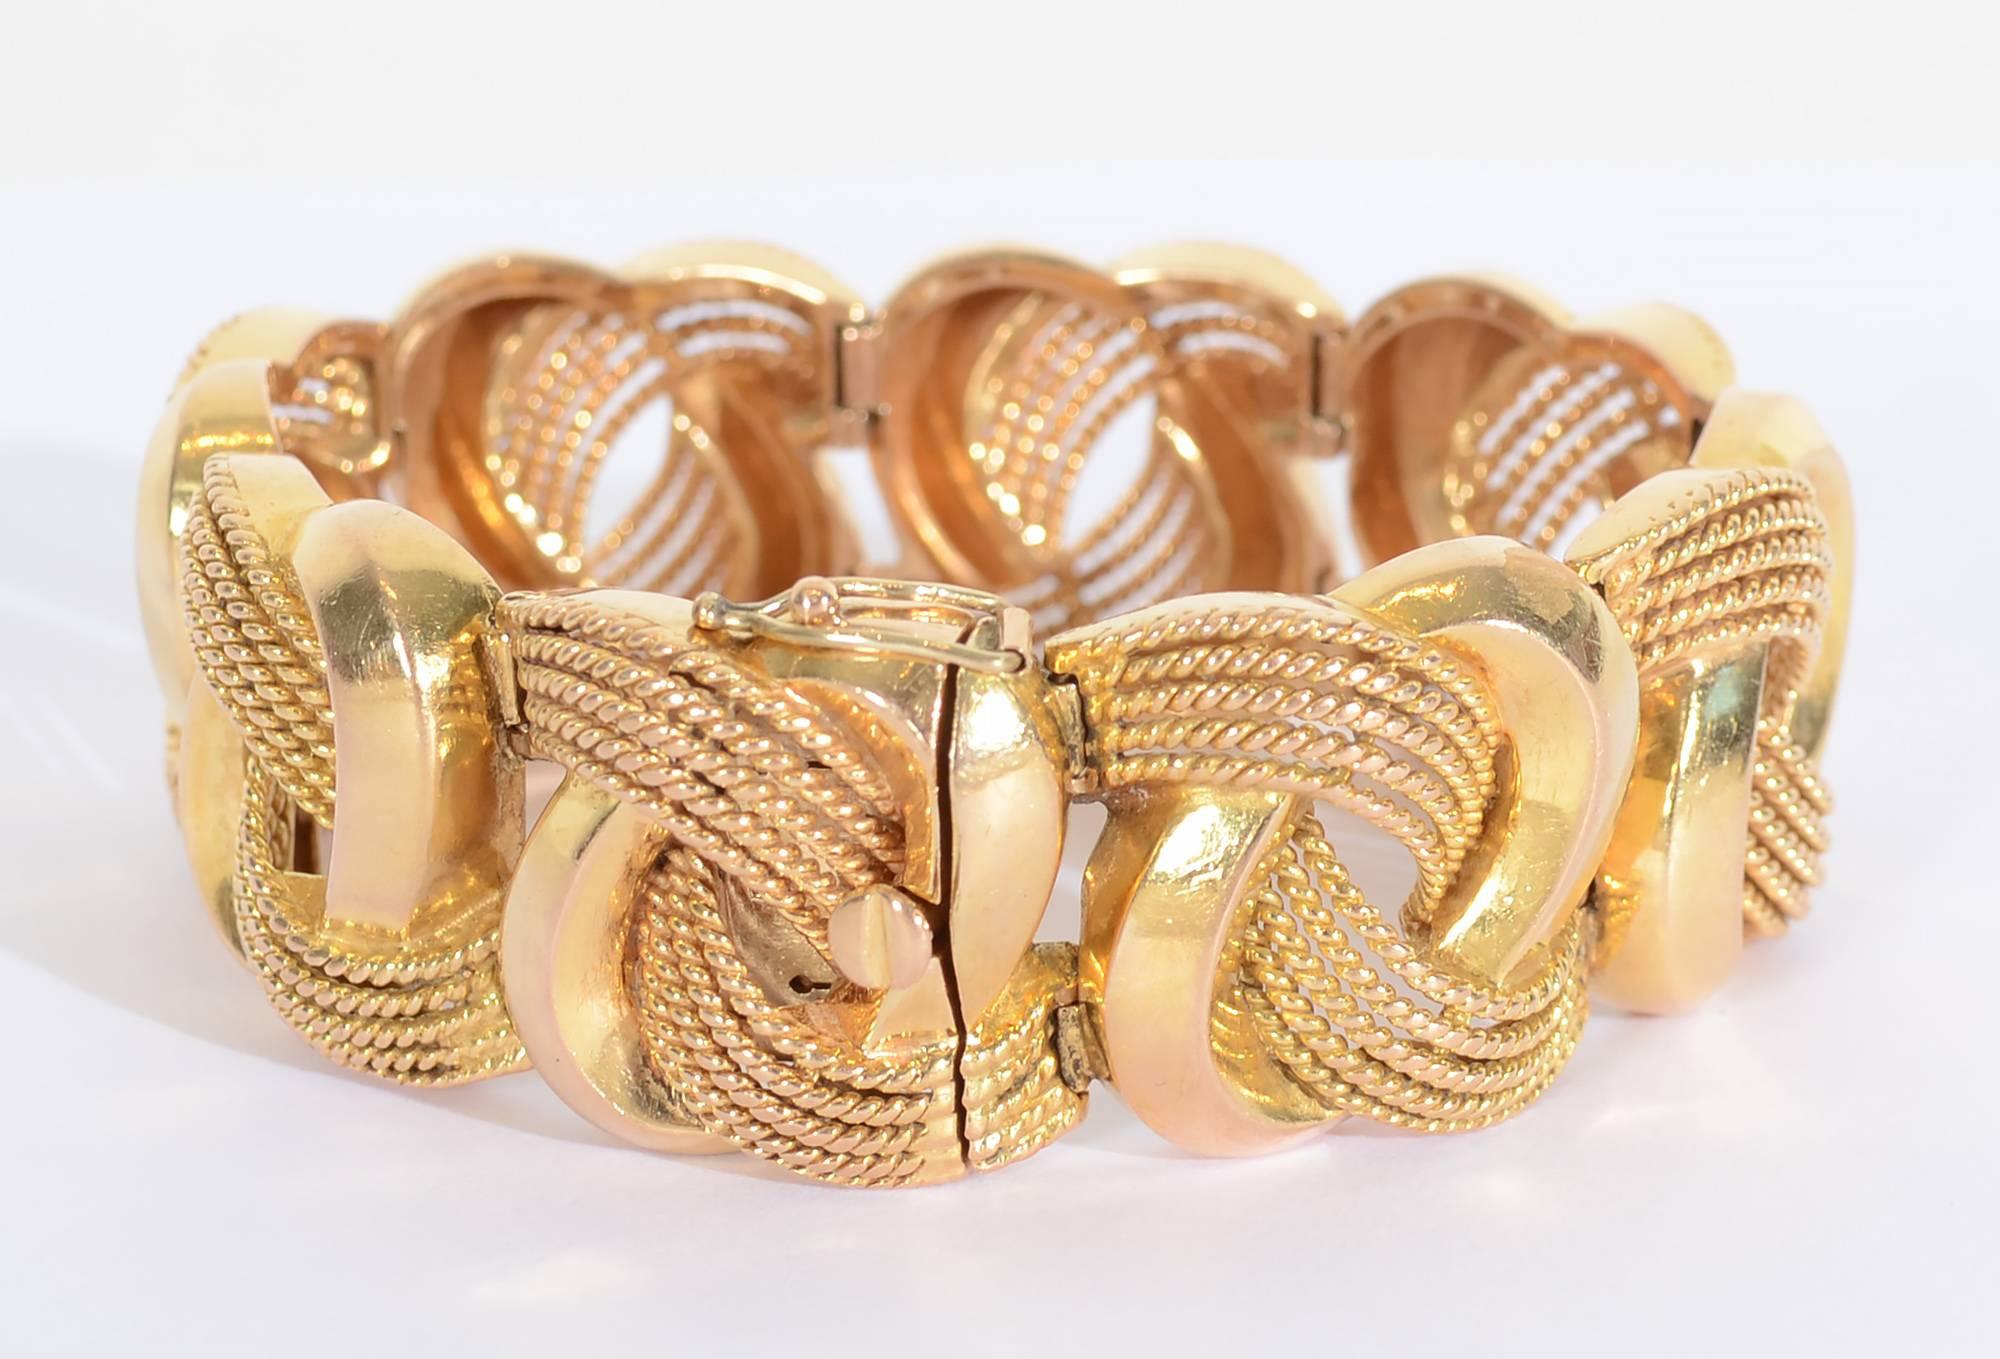 Striking looking 18 karat gold bracelet in which smooth links alternate with four bands of twisted gold links. The two patterns are beautifully interwoven to create a wonderfully three dimensional effect. The bracelet measures 7